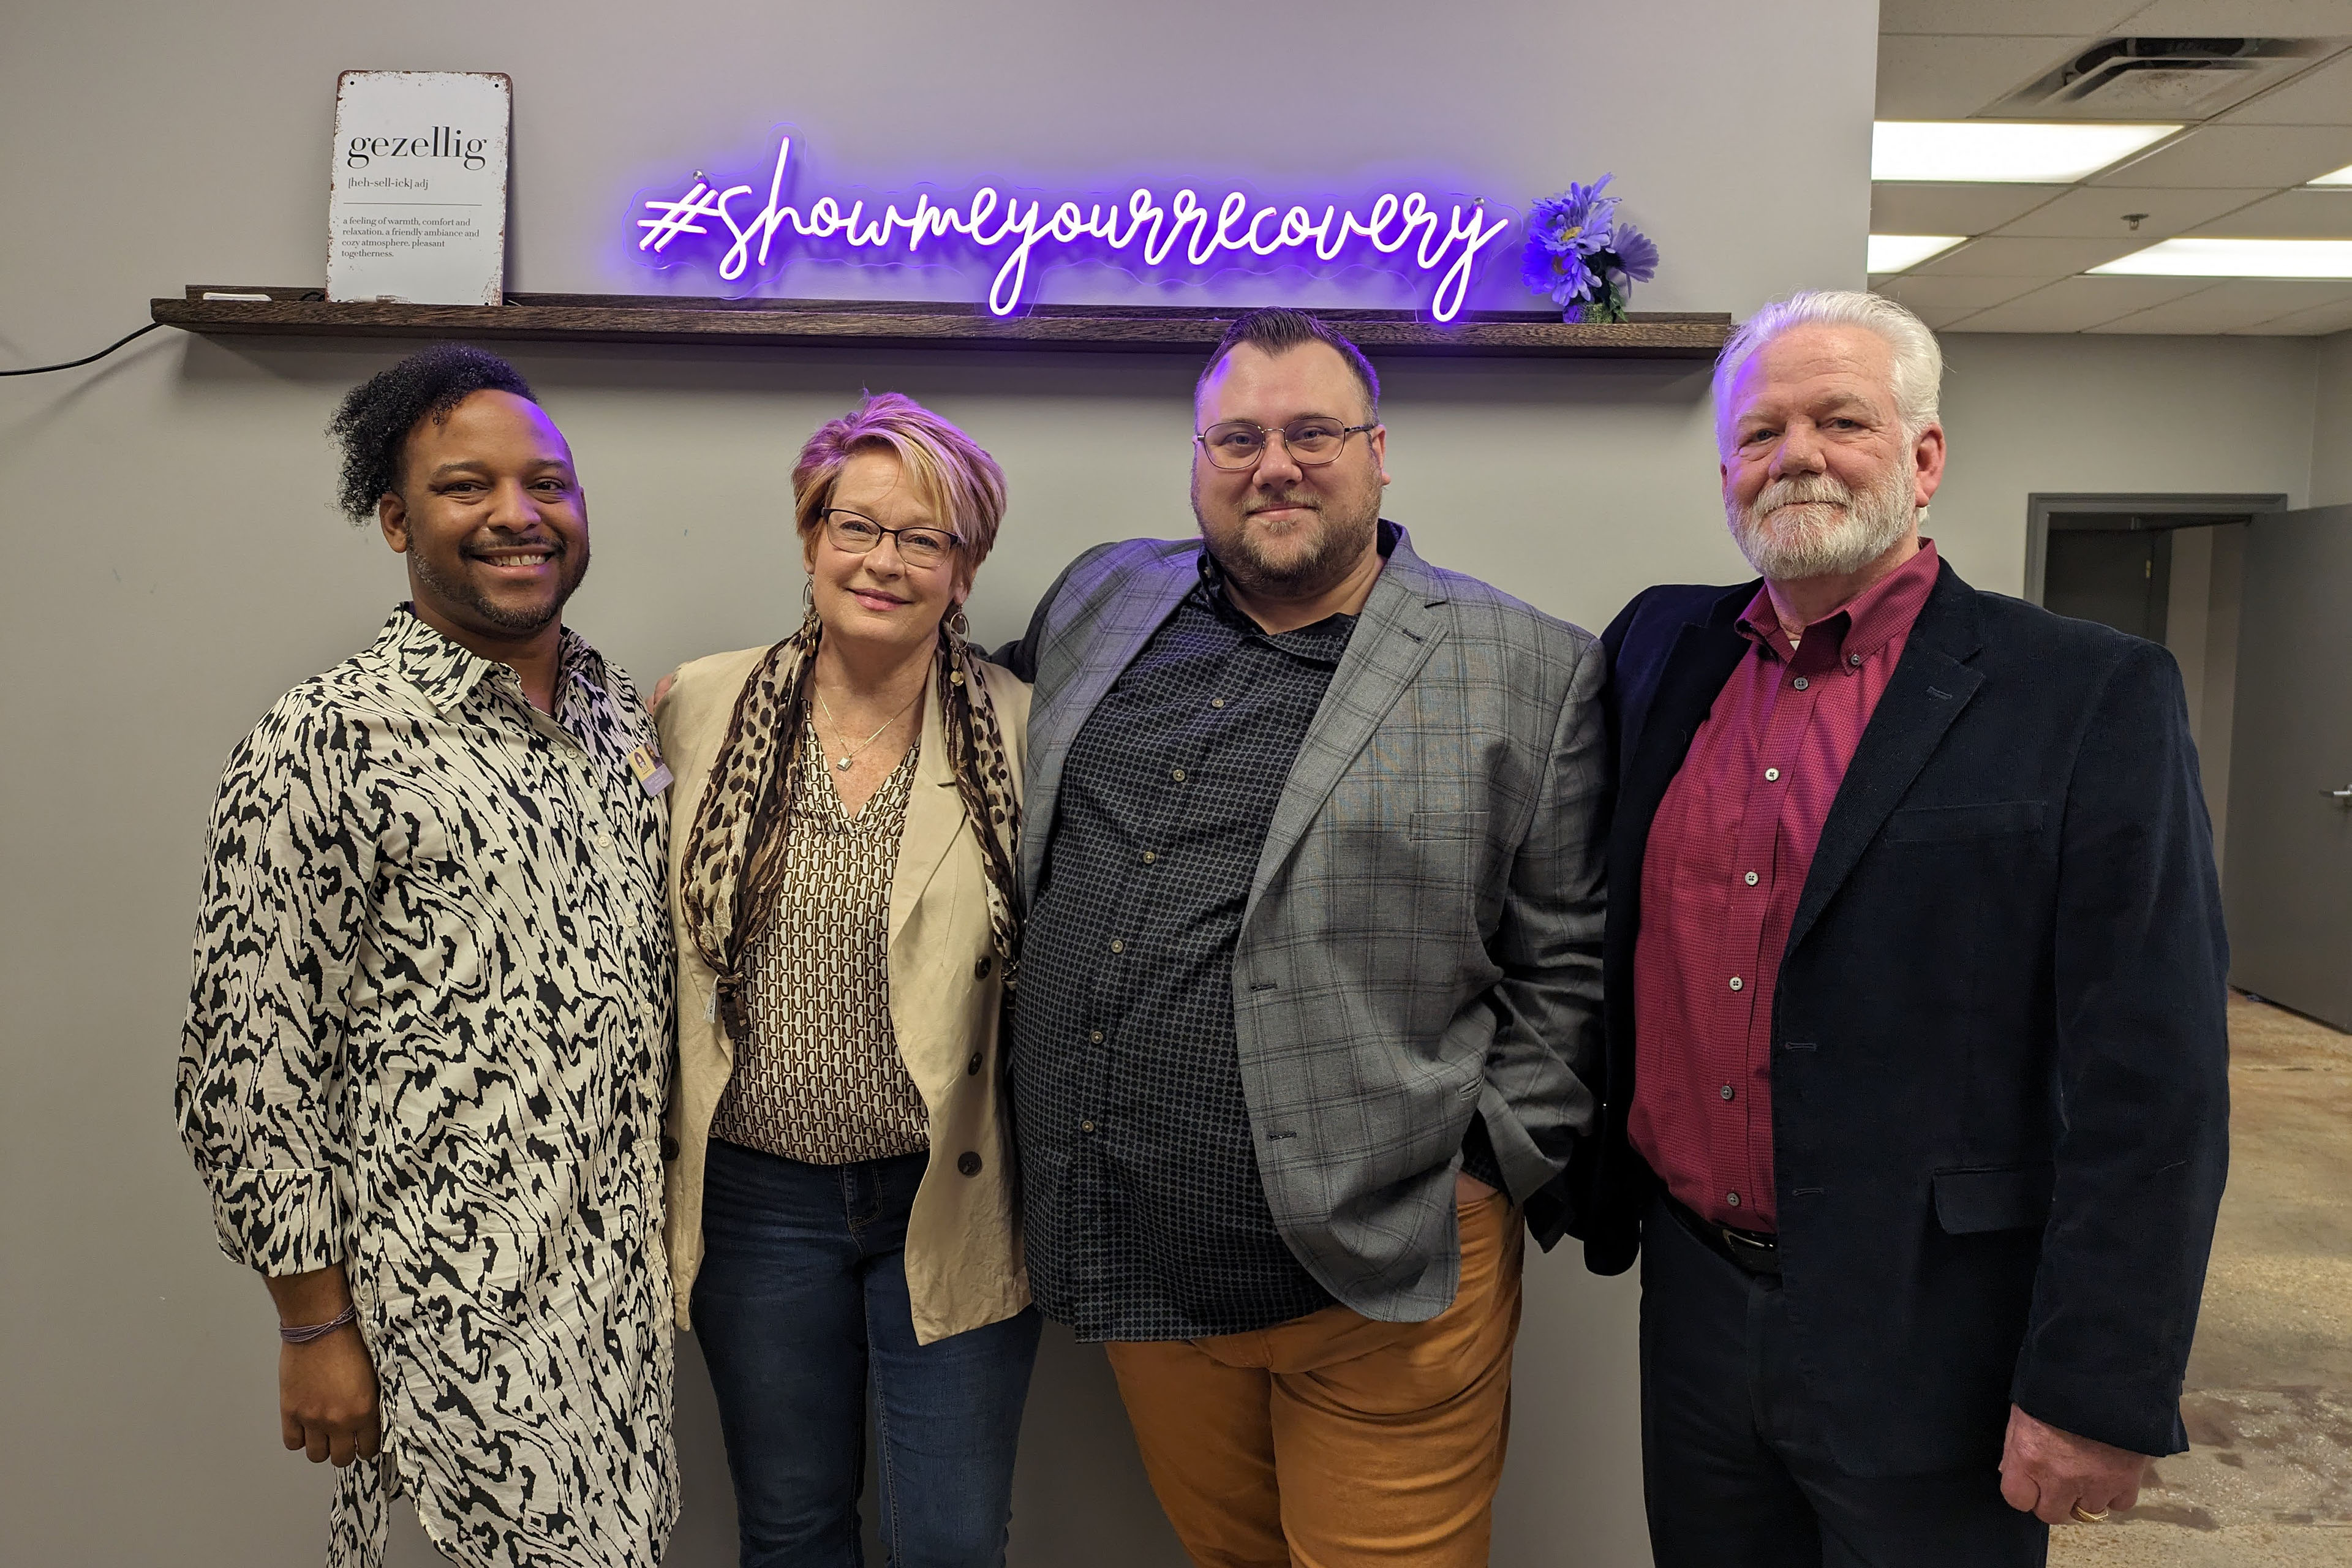 (From left): Devin Burton, Lisa Teggart, Chance Shaw, and Larry Vahle stand side by side in an office room. Above them in a purple neon sign which reads, "#showmeyourrecovery" in script.